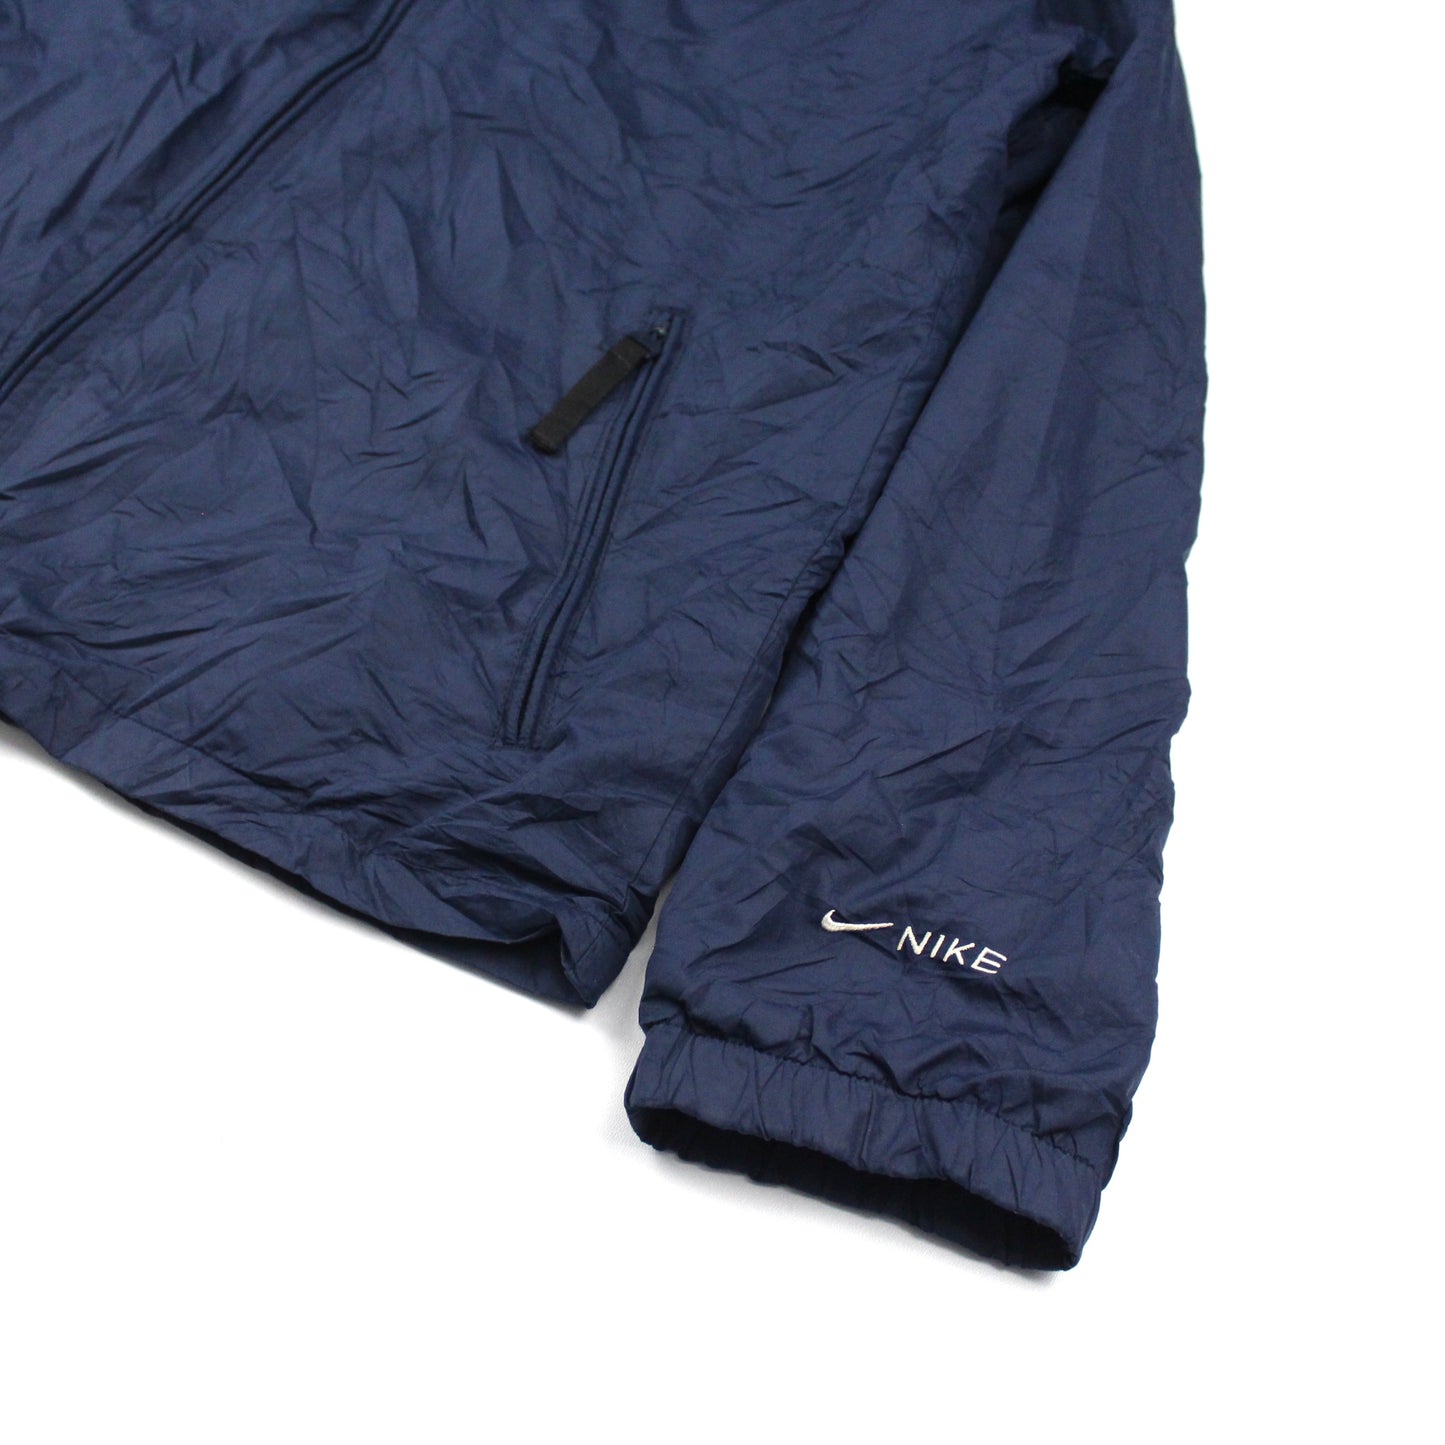 Nike Navy Shell Jacket, Grey Cotton Lining, 2000s tag (L)